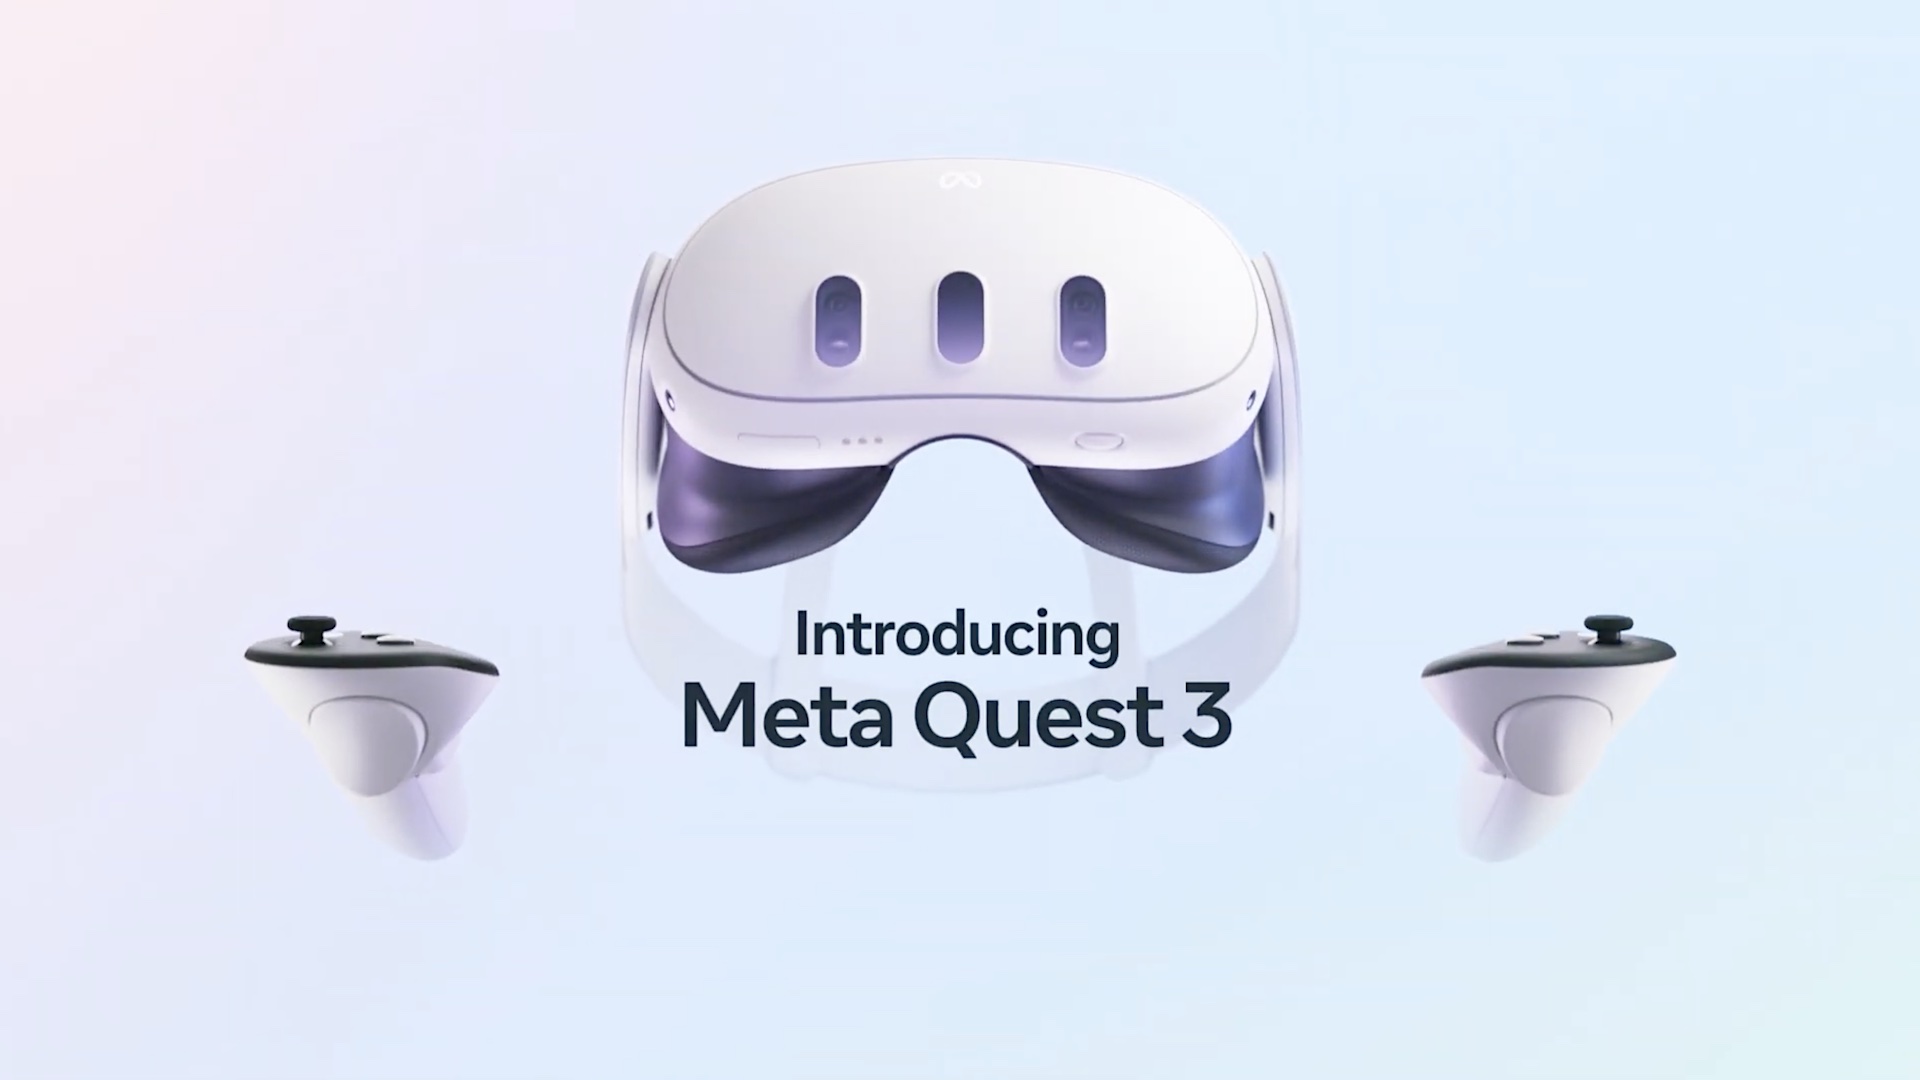 Meta Quest 3 has been officially announced: This is what the new headset brings